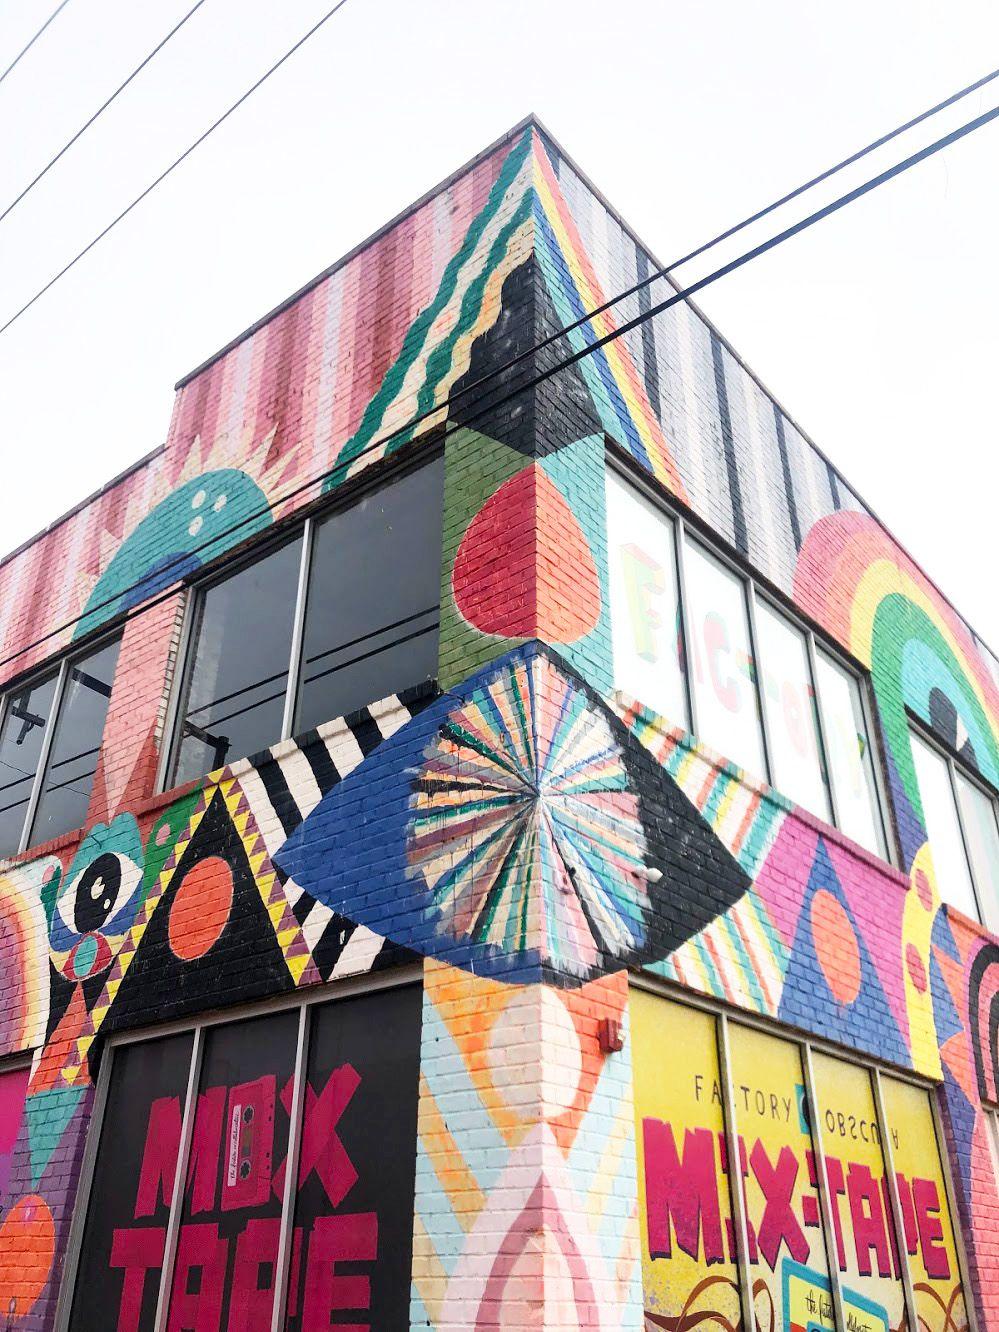 The exterior of Factory Obscura. The building is painted in colorful abstract shapes